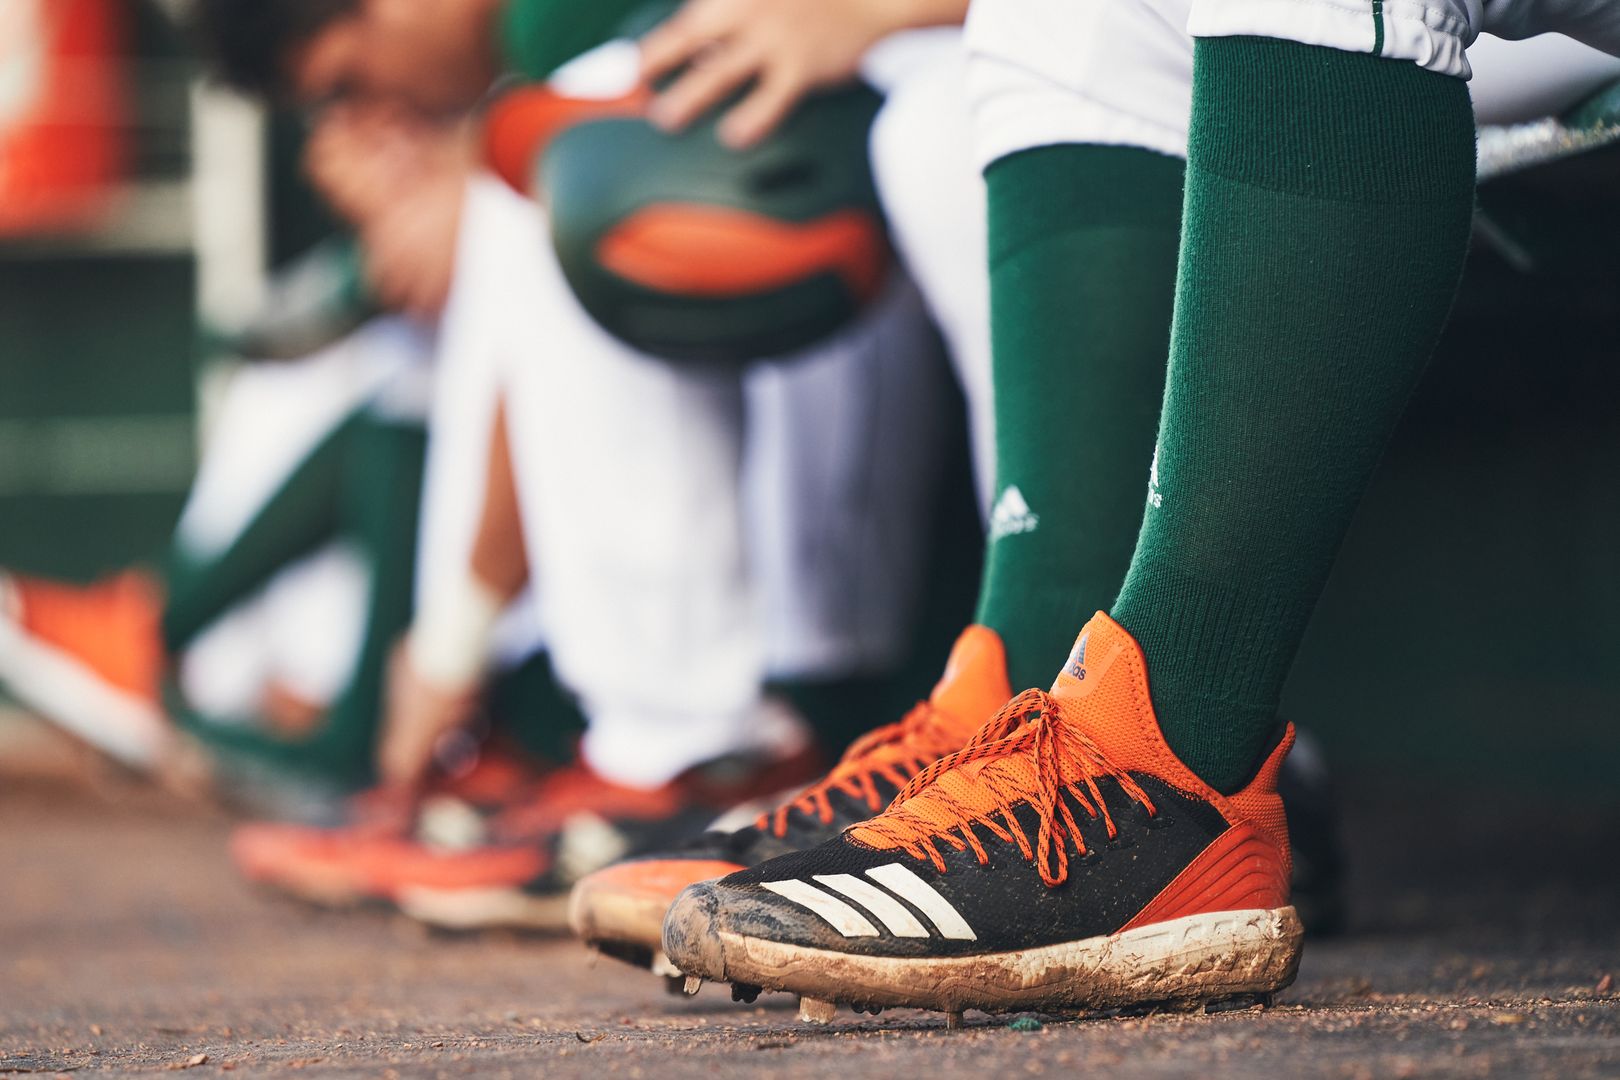 Miami Baseball to Hold Walk-on Tryouts on Sept. 14